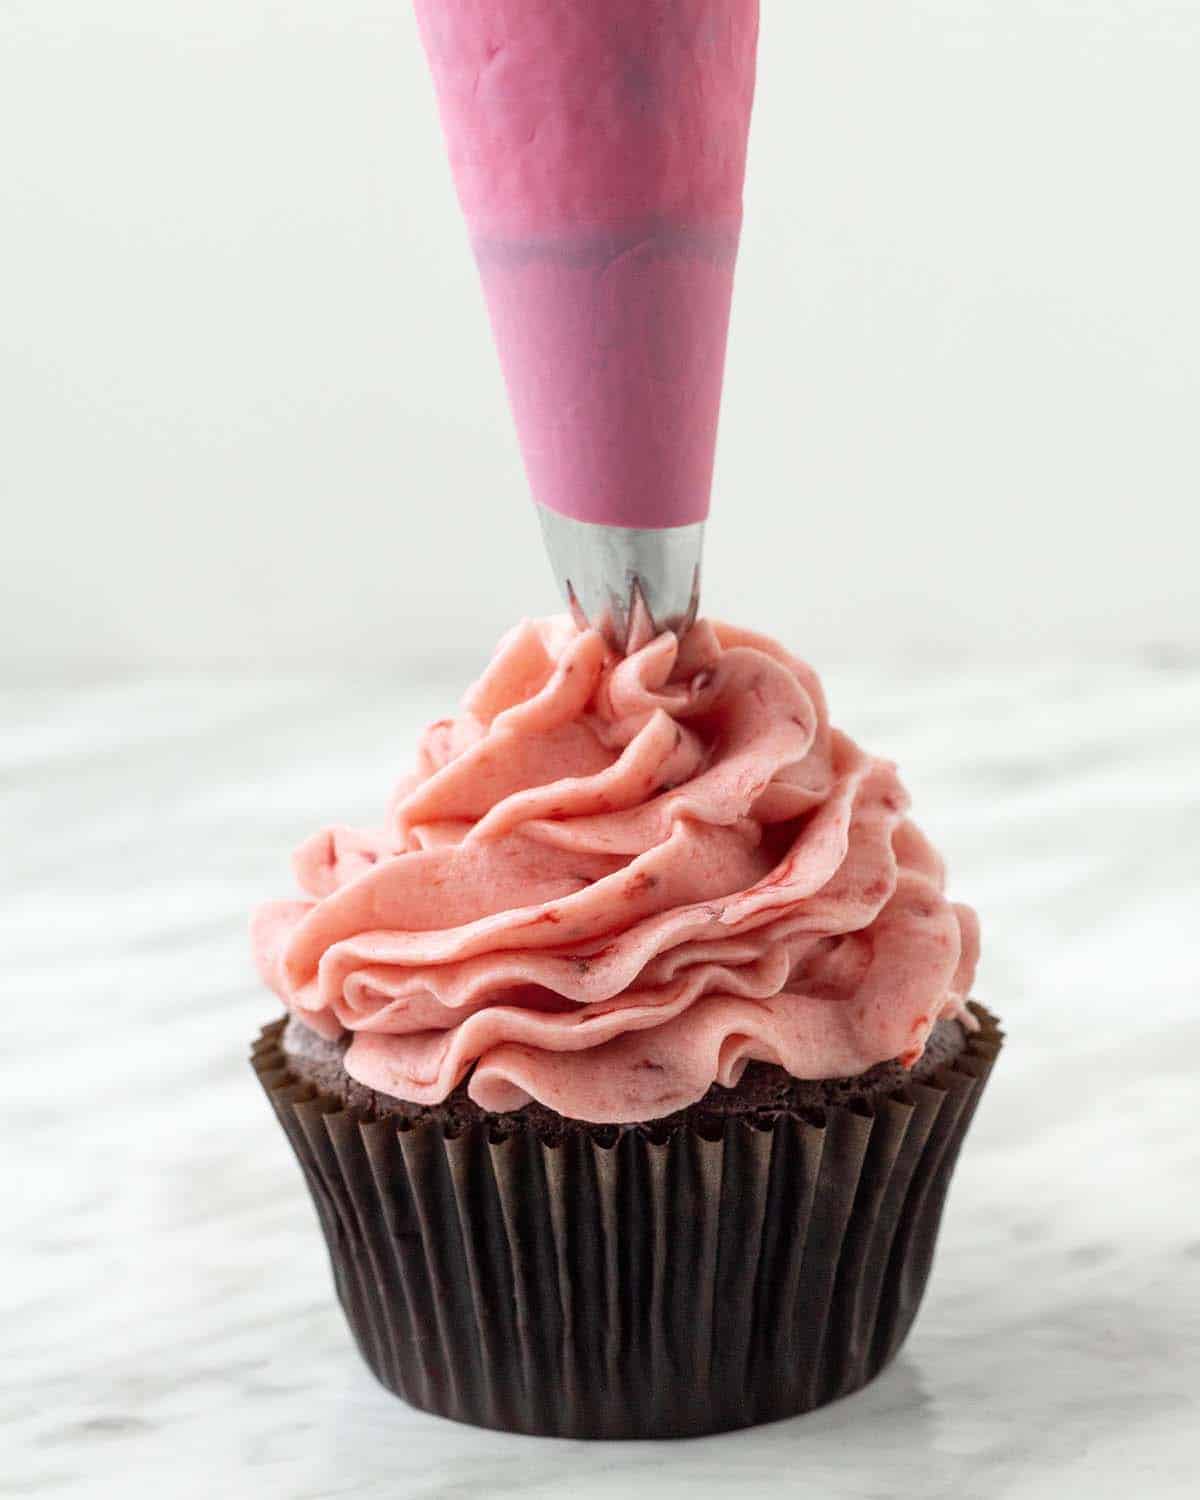 Homemade strawberry buttercream being piped onto a chocolate cupcake.